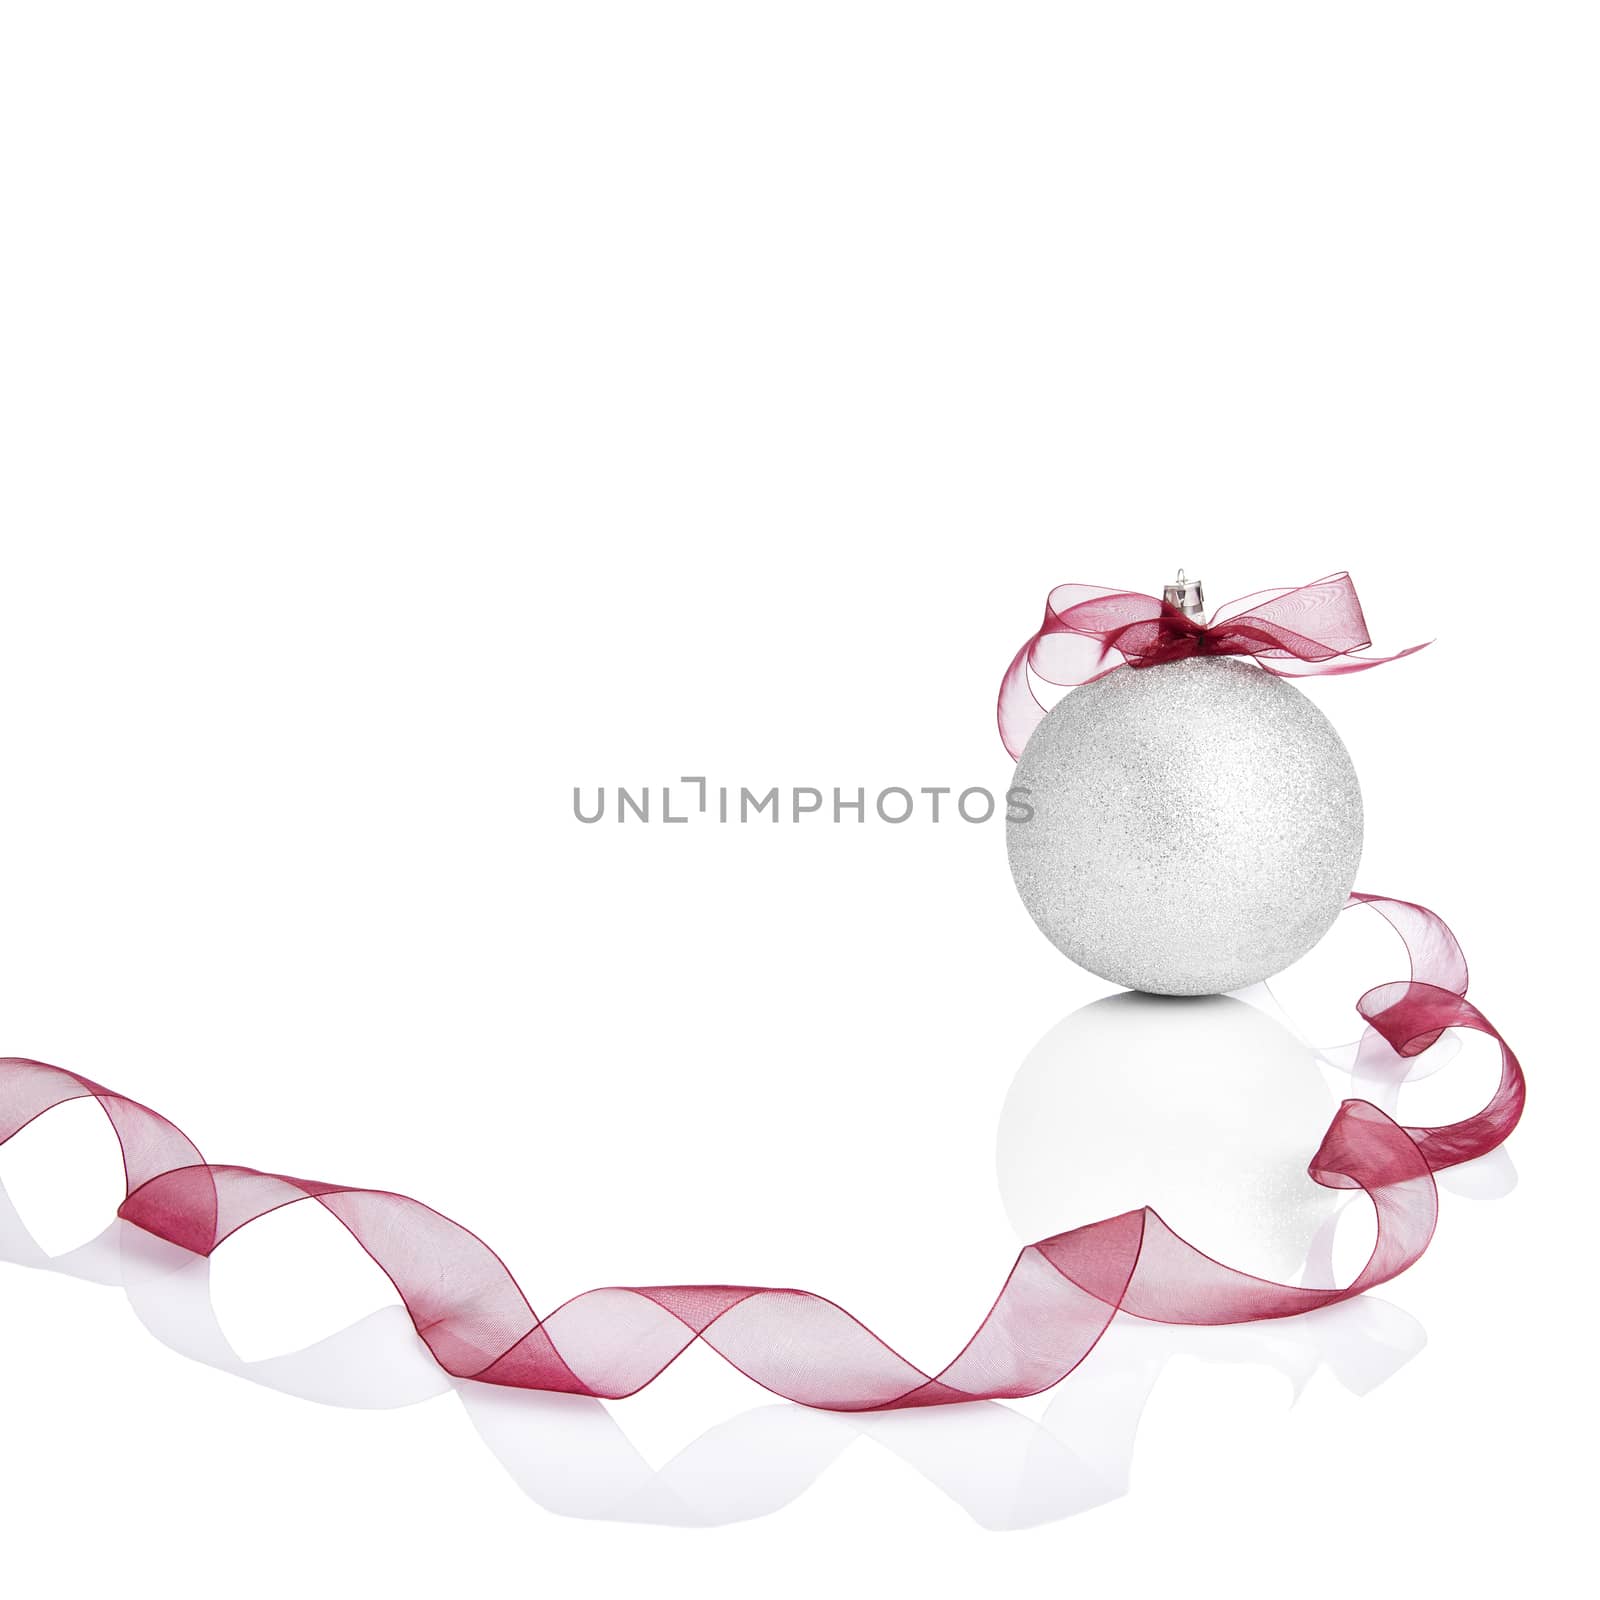 Silver Christmas ball with red bow. White copy space for your text and logo.